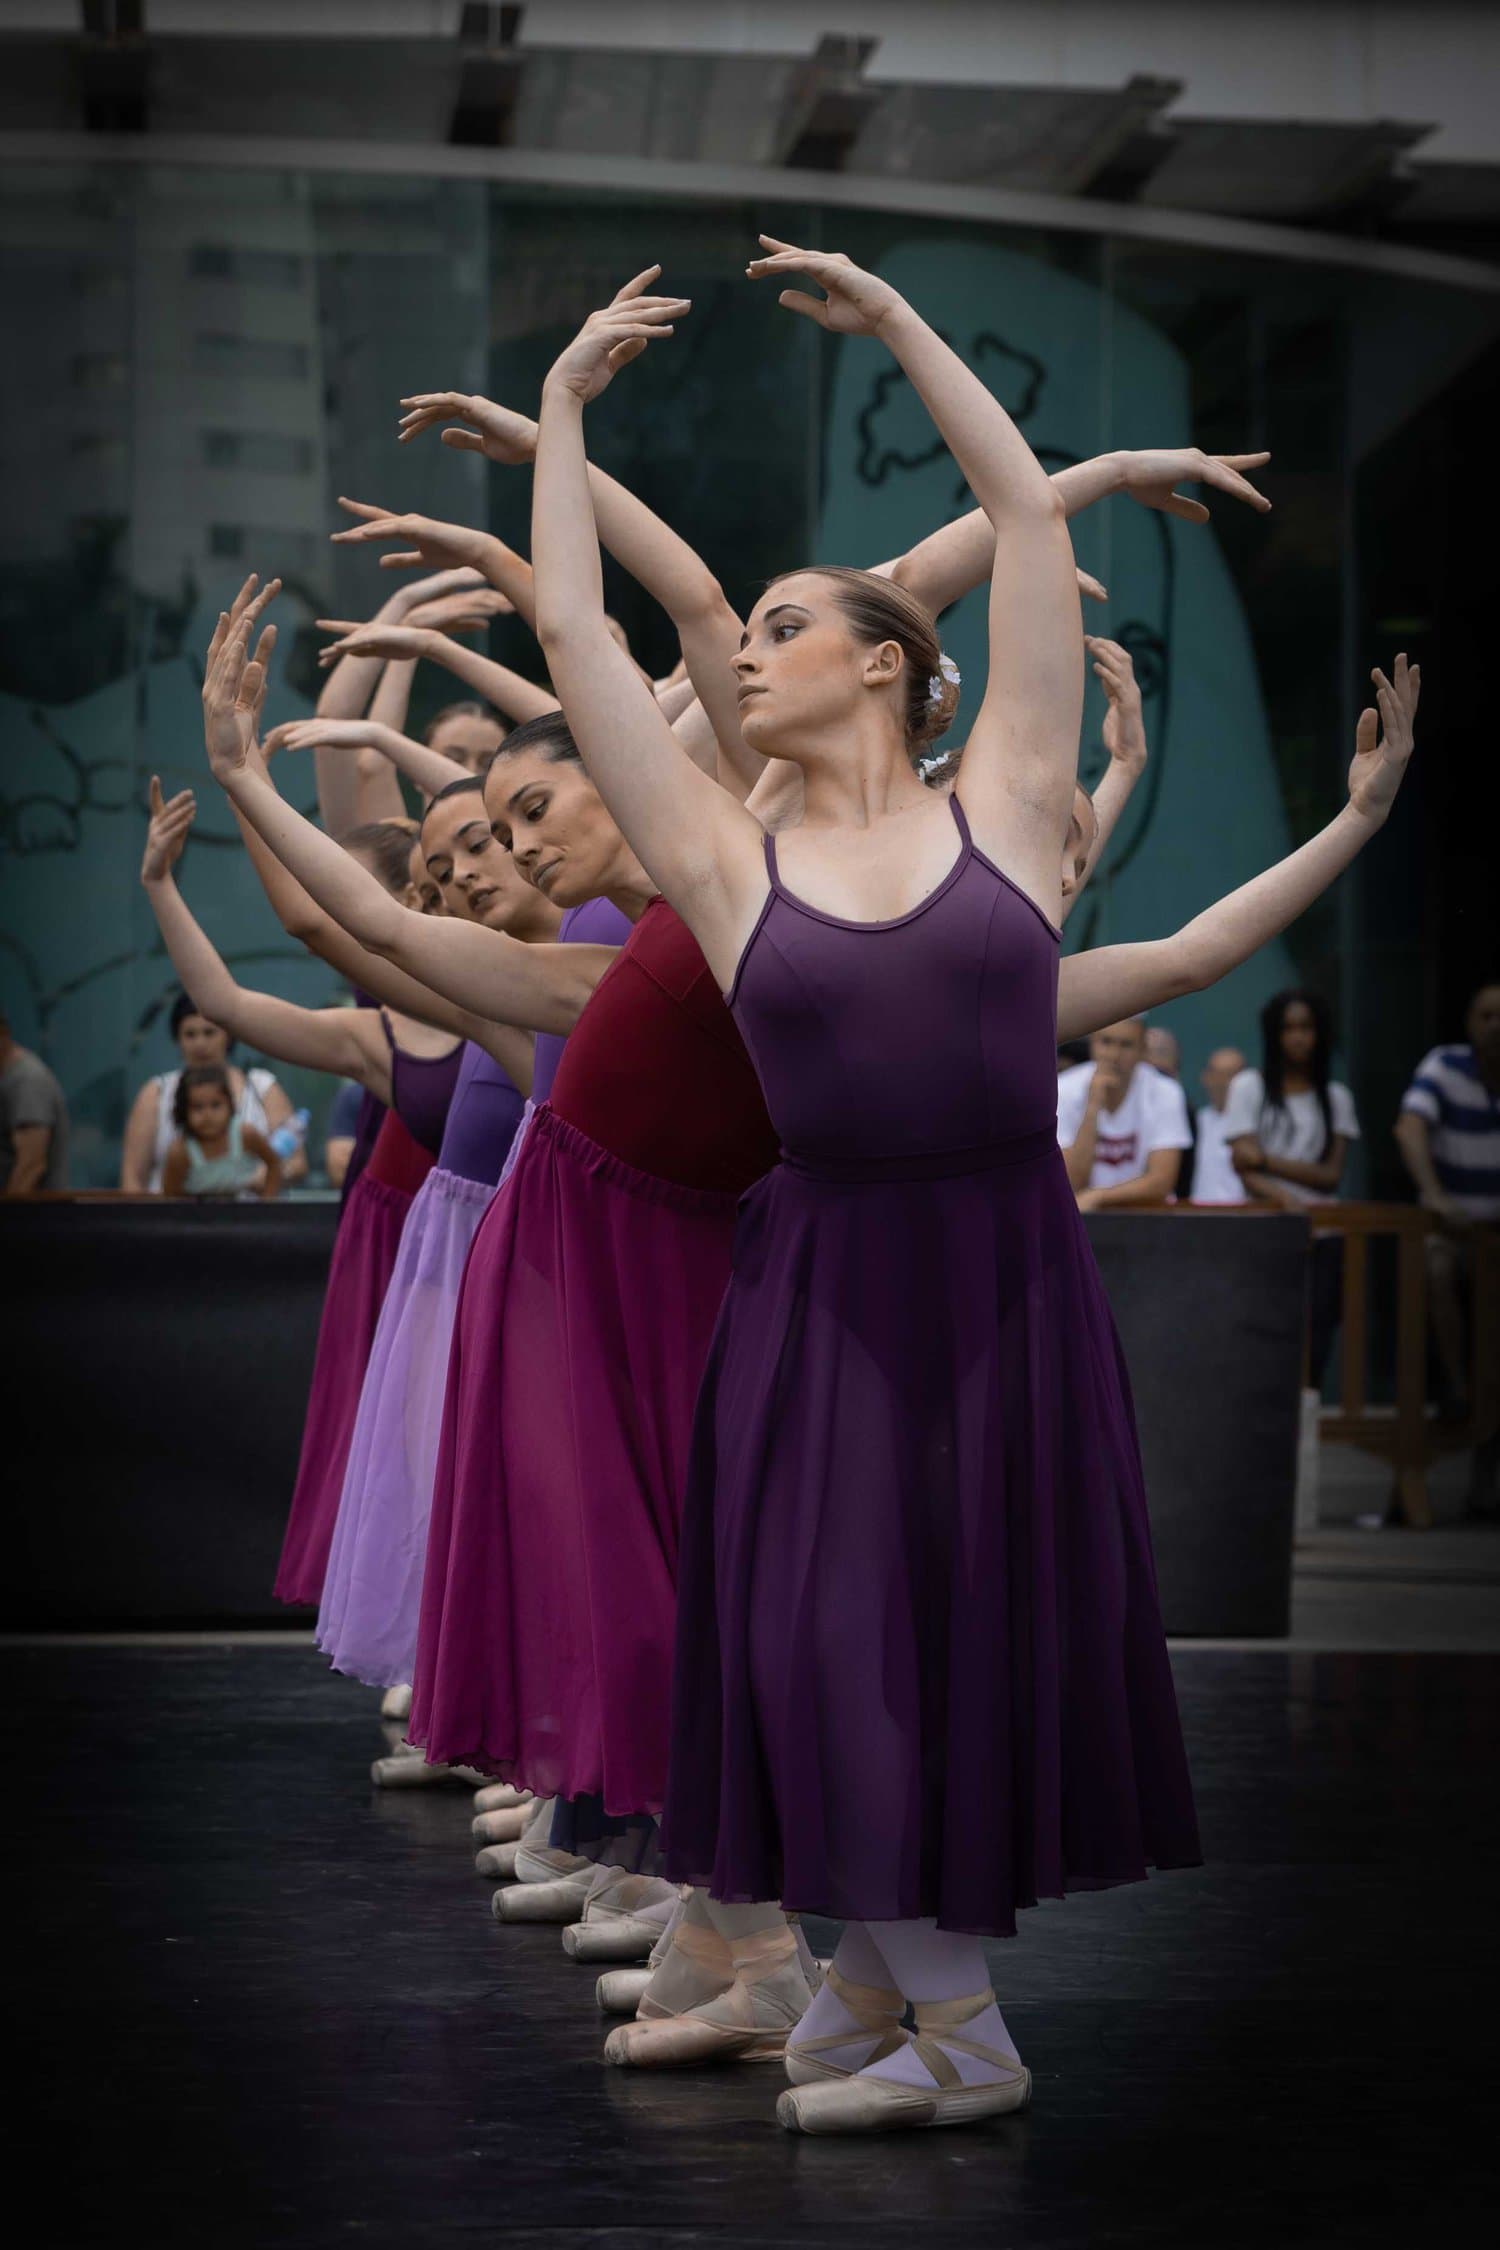 dance photography, example taken with Canon R6